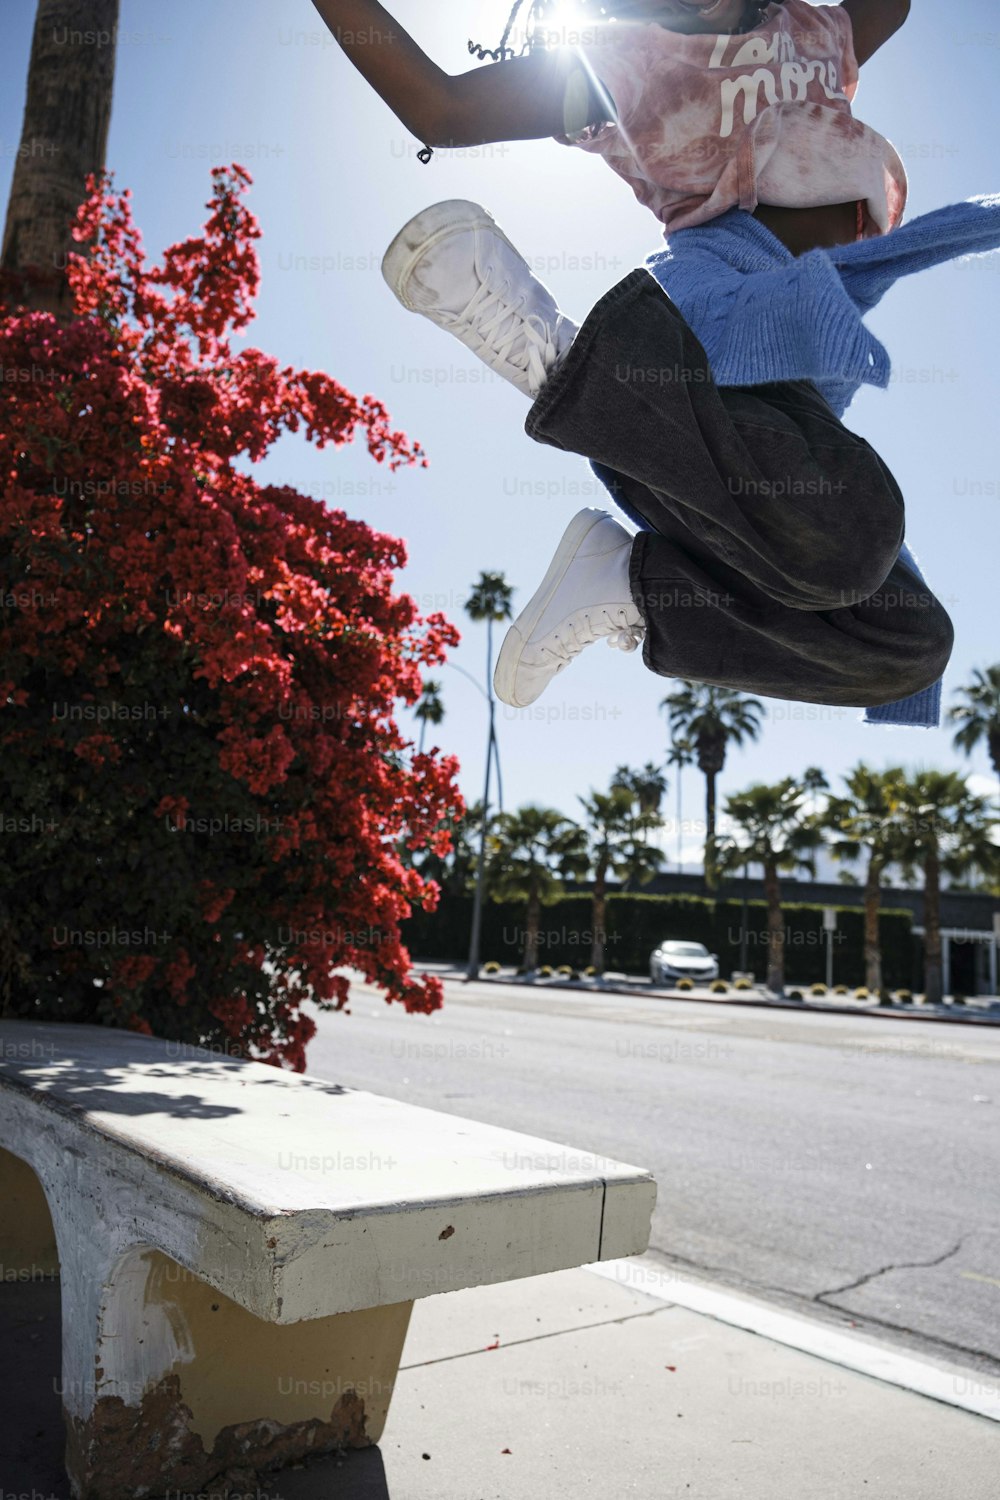 a person jumping in the air on a skateboard